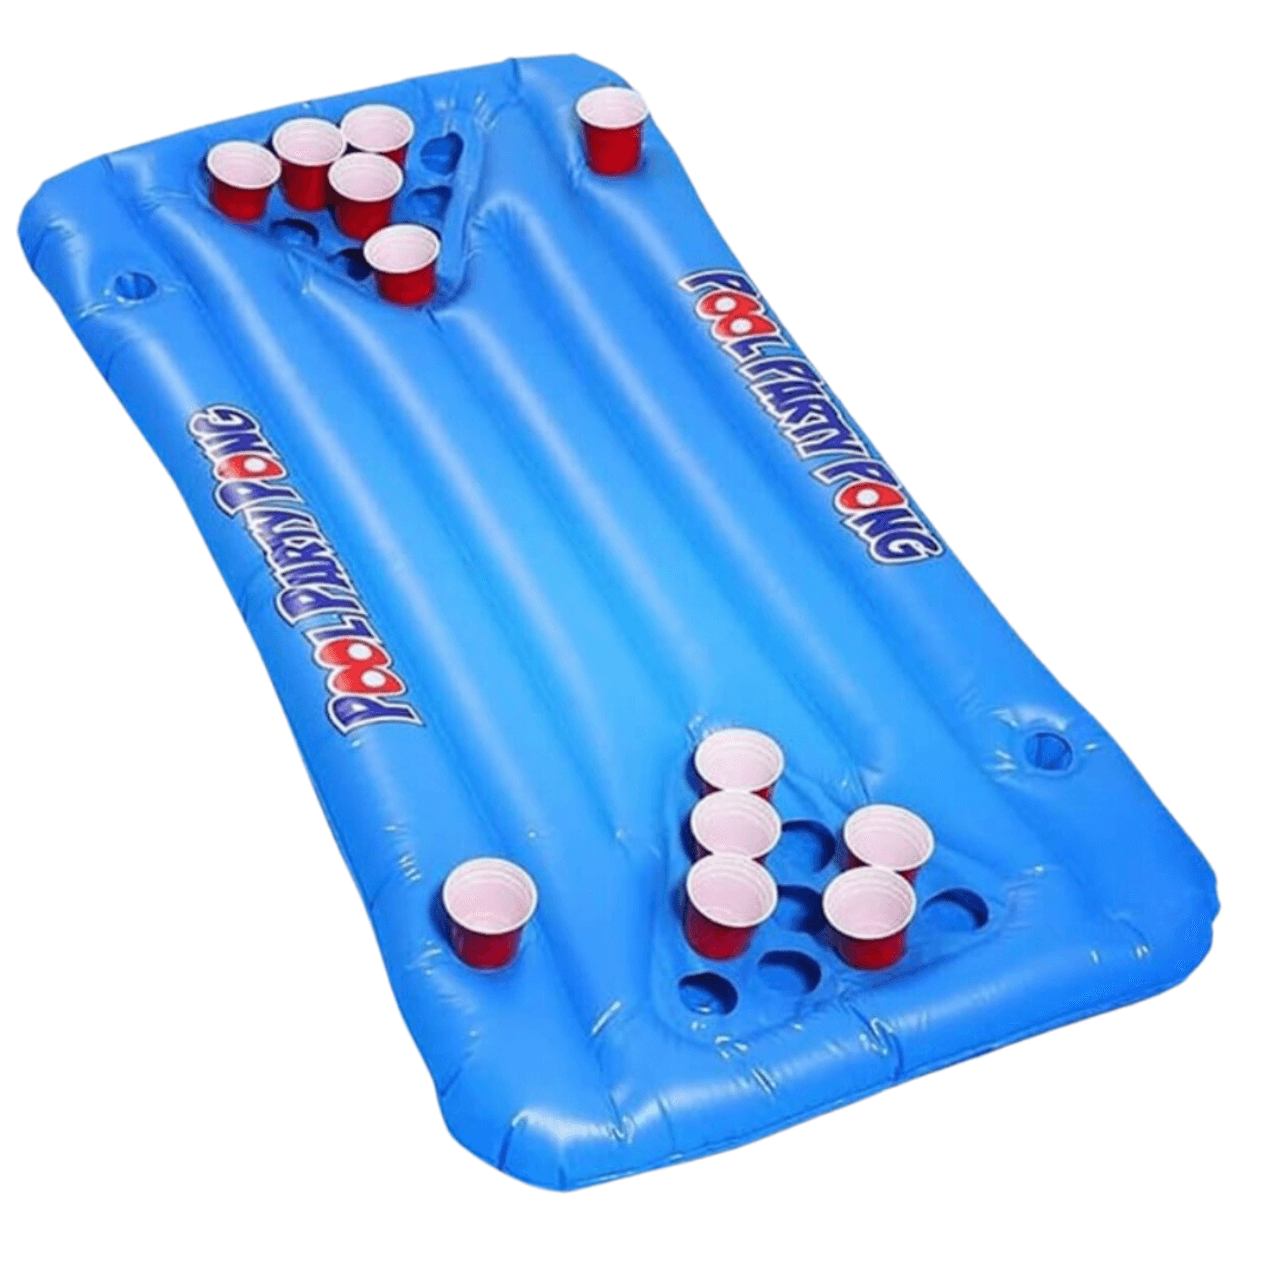 Inflatable Beer Pong Table - Expat Life Style